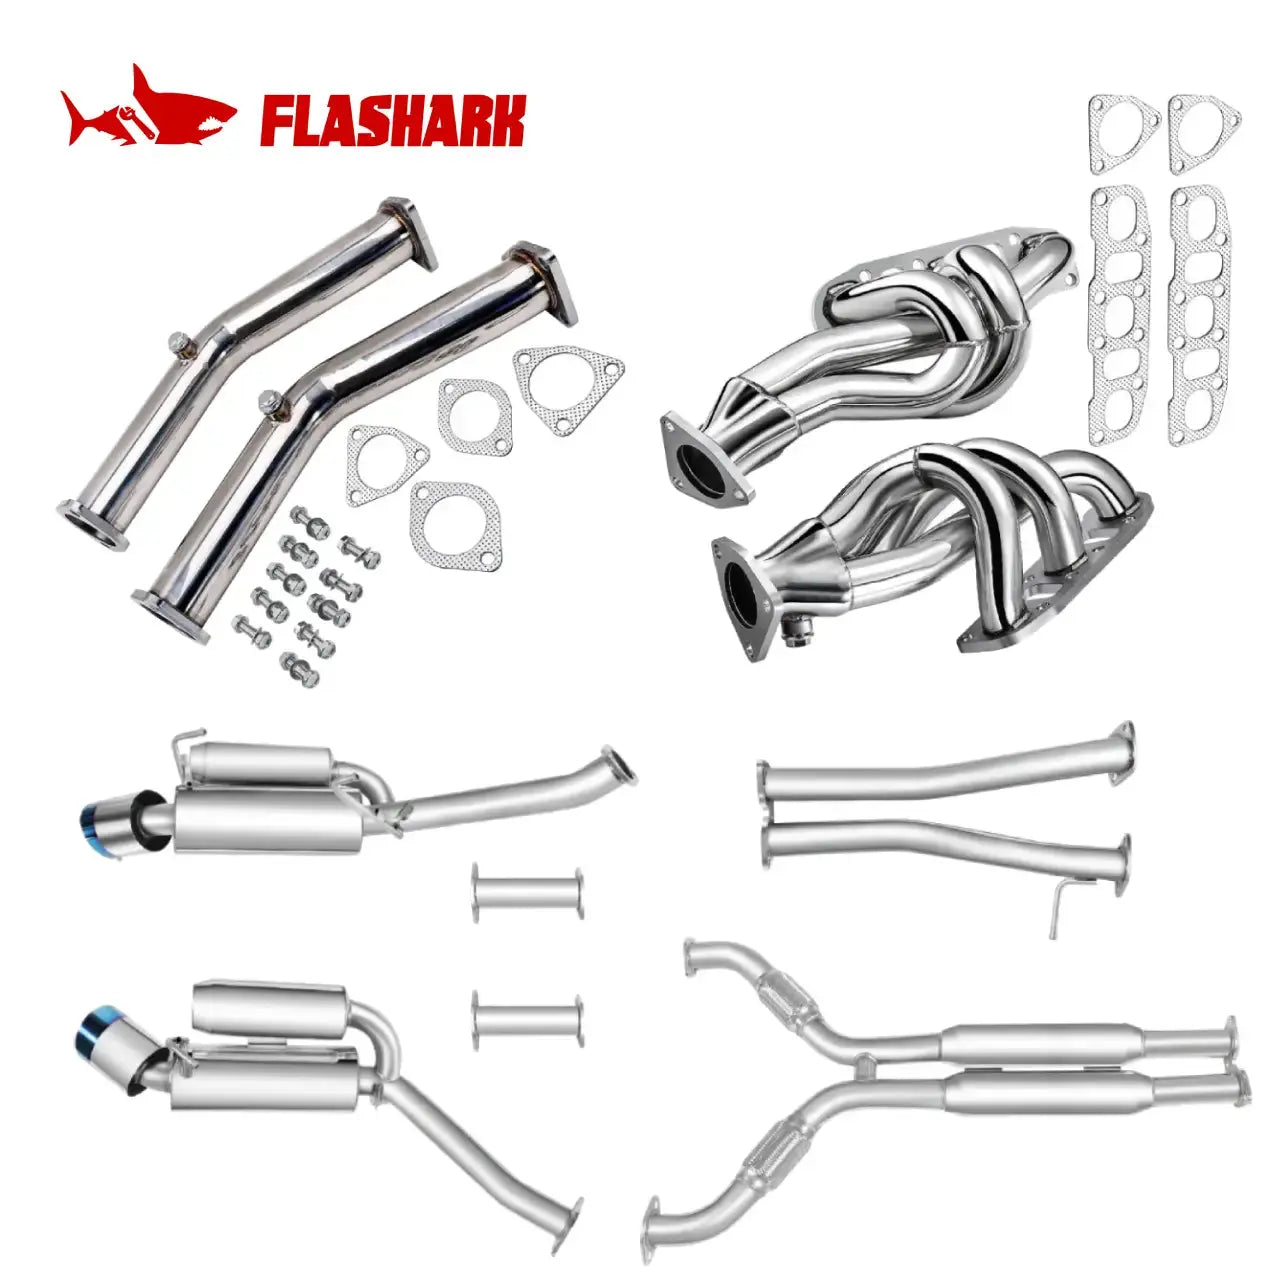 Exhaust Header/Downpipe/CatBac w/ 4.5" Dual Burnt Tips All-In-One Kit for 2003-2006 Nissan 350Z Flashark